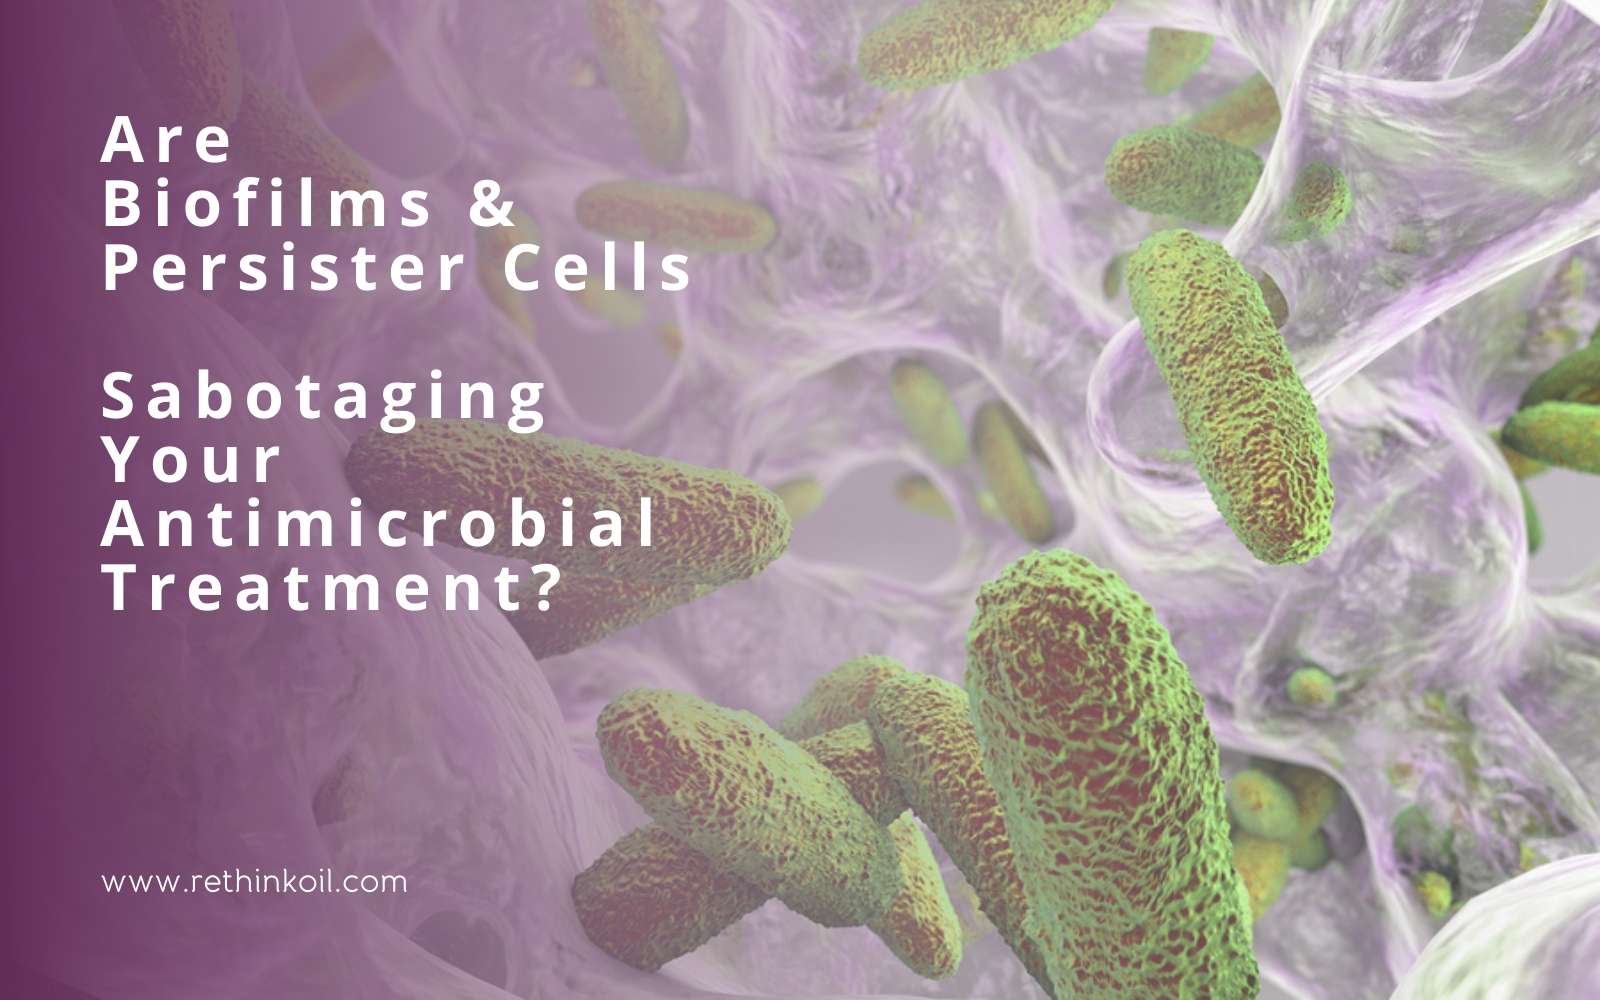 ReThinkOil Blog Are Biofilms & Persister Cells Sabotaging Your Antimicrobial Treatment?